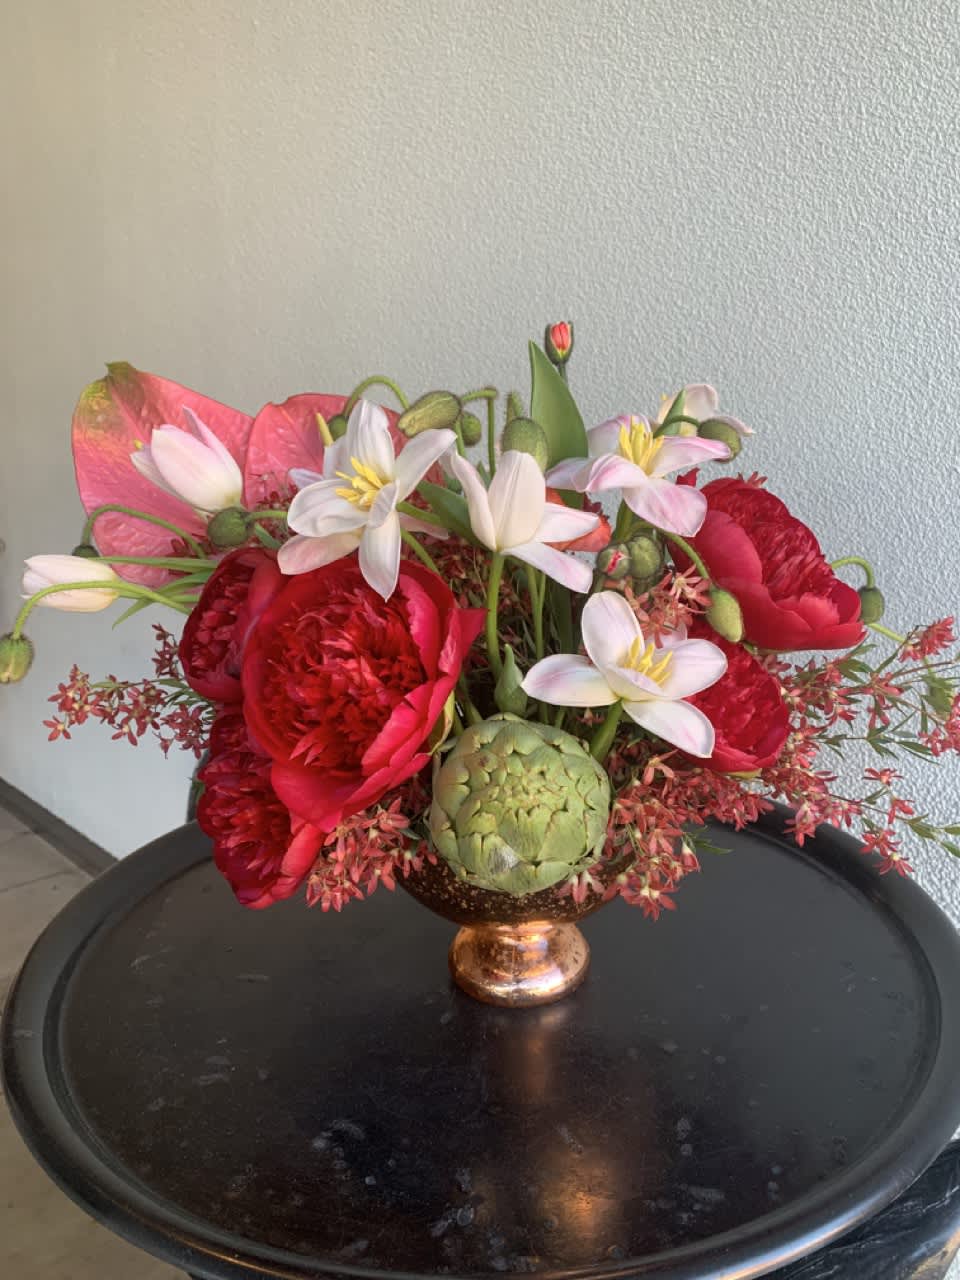 Sustainable composition with red Peonies, Tulips and Artichoke.